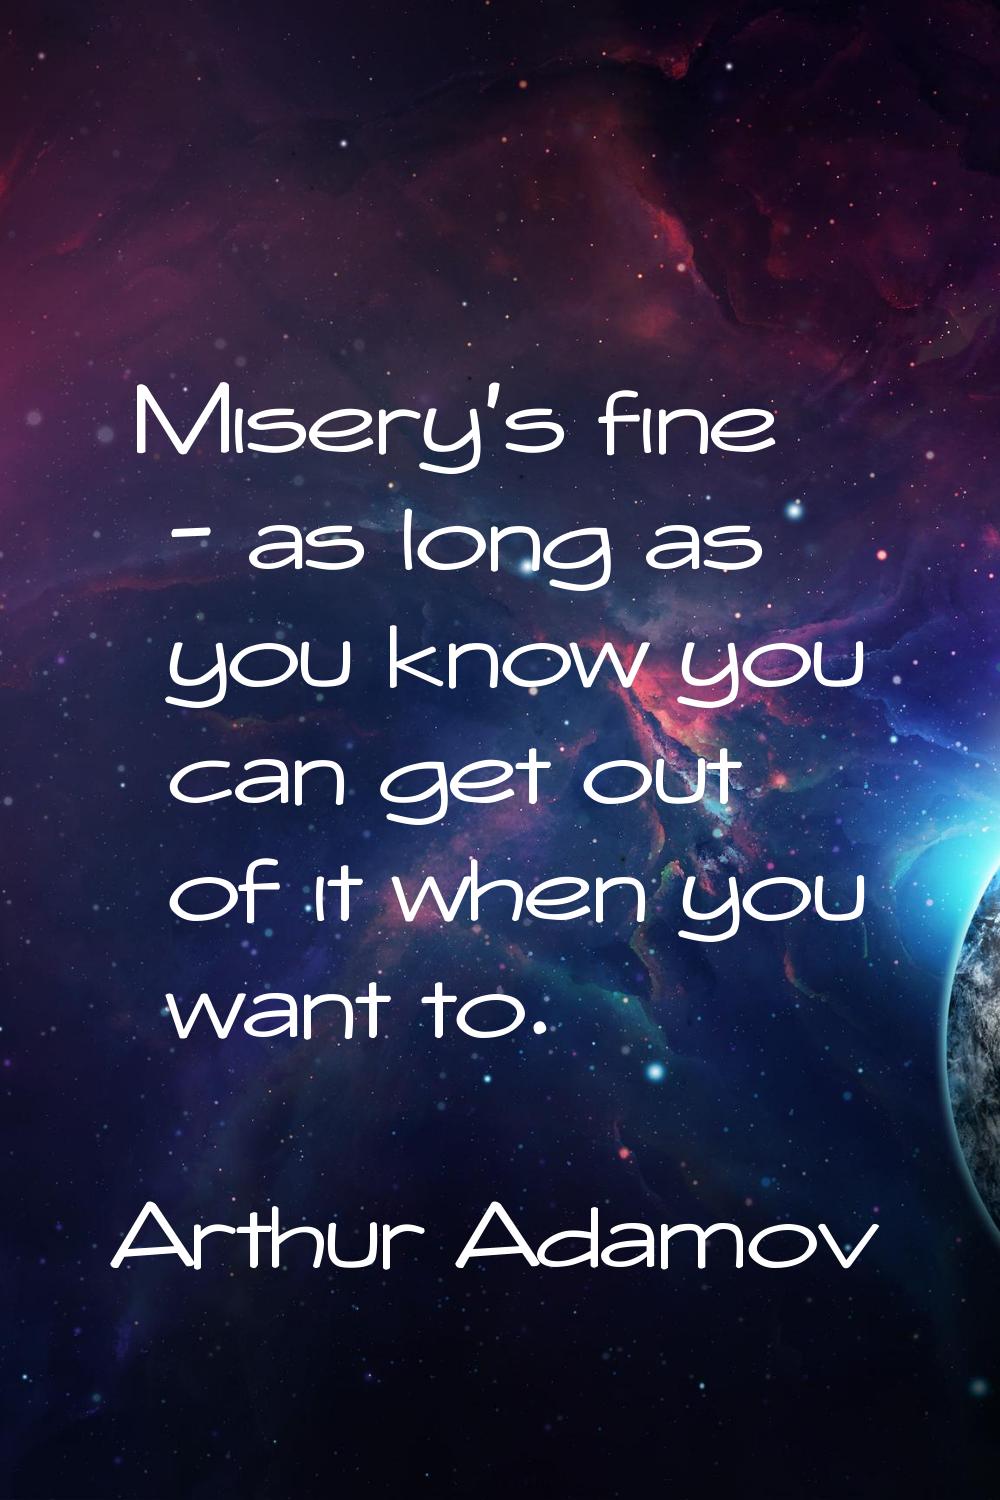 Misery's fine - as long as you know you can get out of it when you want to.